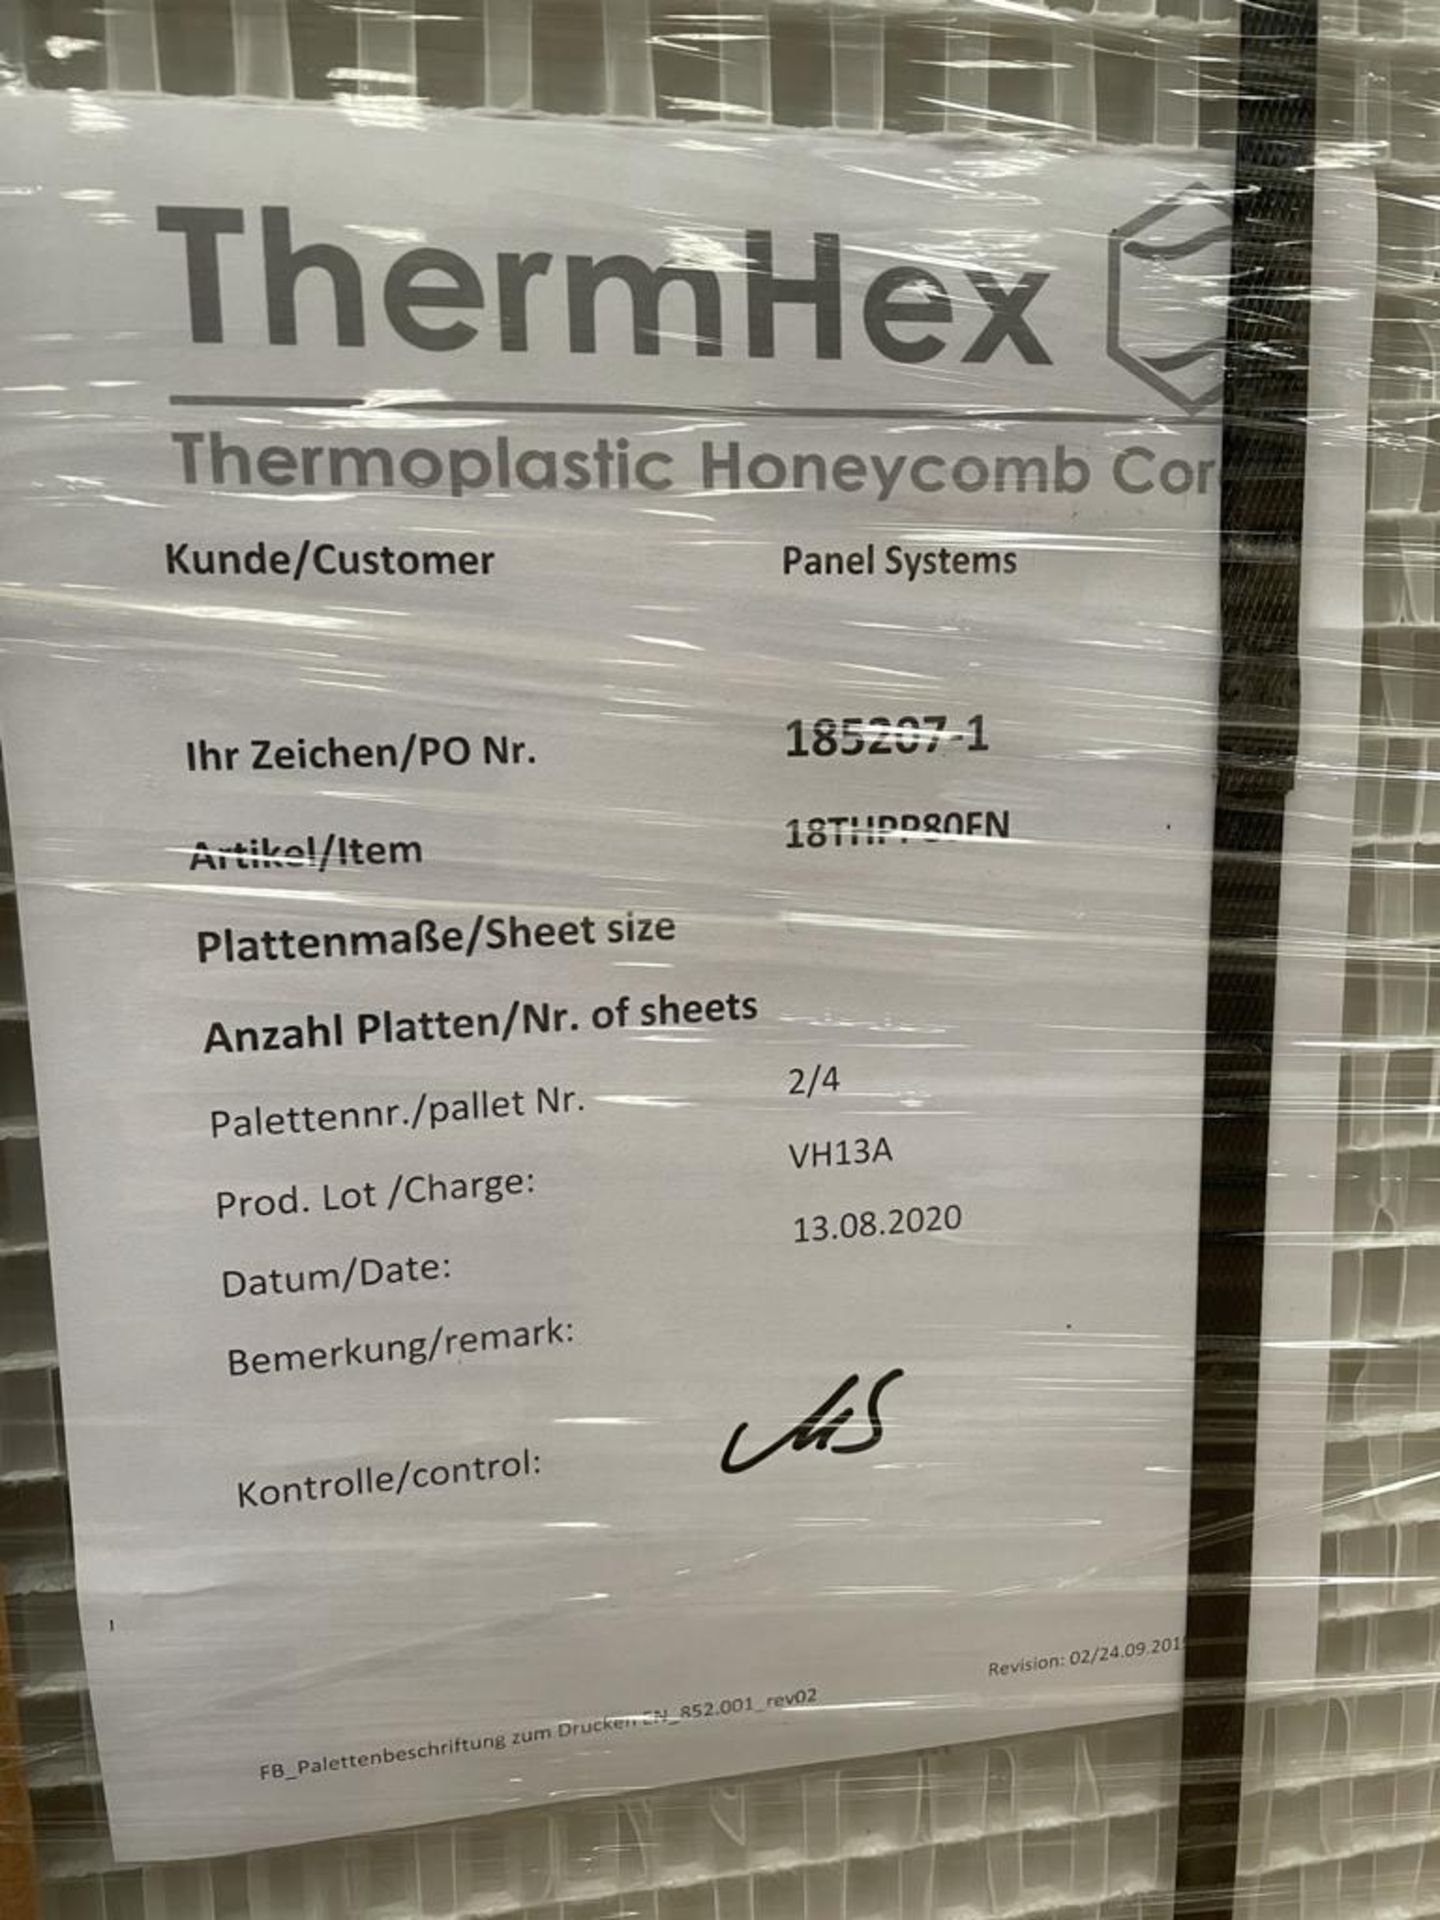 25 x ThermHex Thermoplastic Honeycomb Core Panels - Size 2630 x 1210 x 18mm - New Stock - - Image 4 of 8